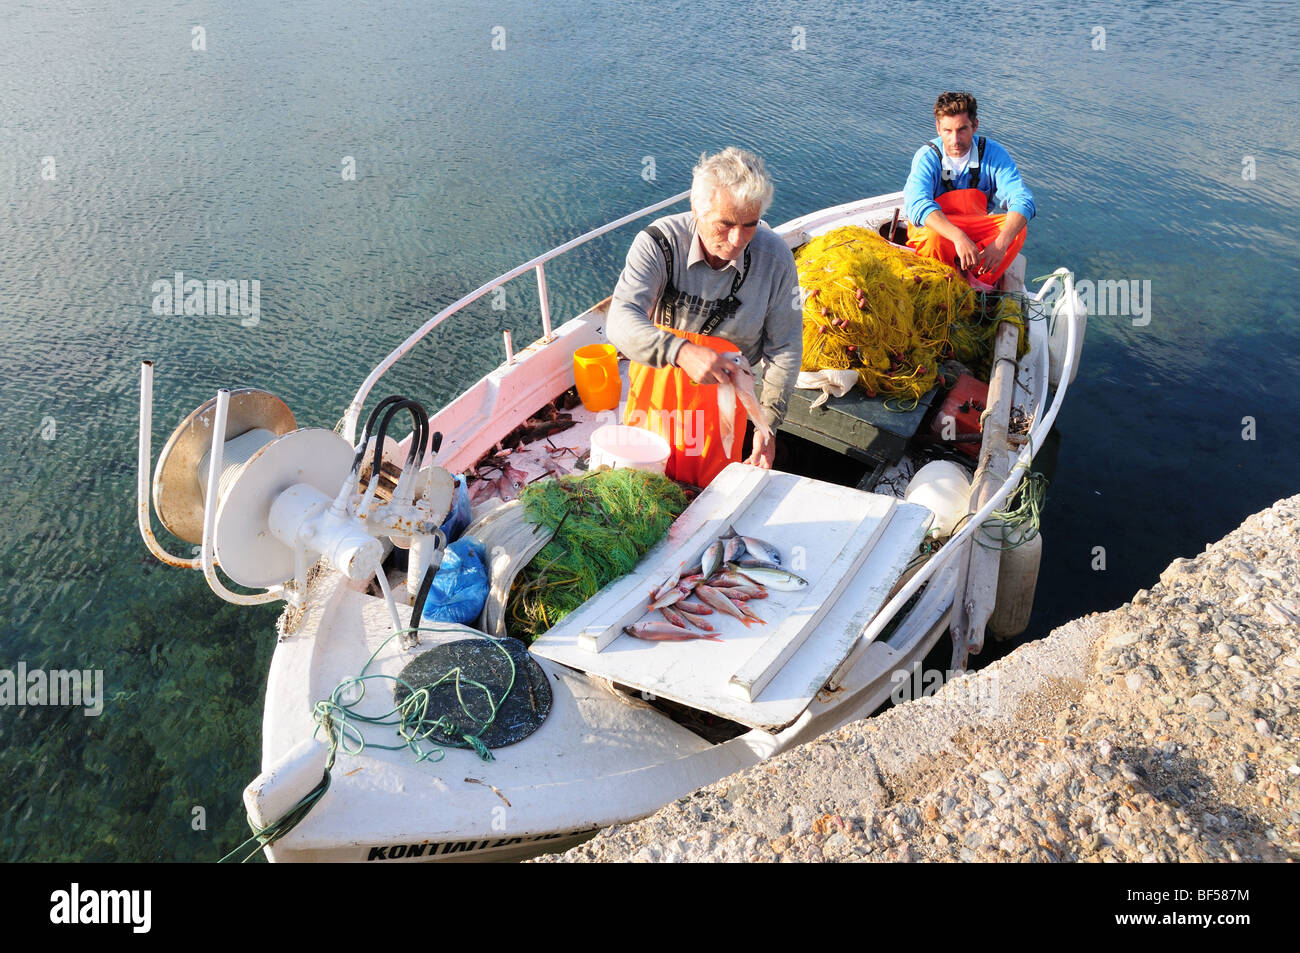 Two Greek fishermen in a small fishing boat  with their catch of fish Marmari Harbour Evia Greece Stock Photo